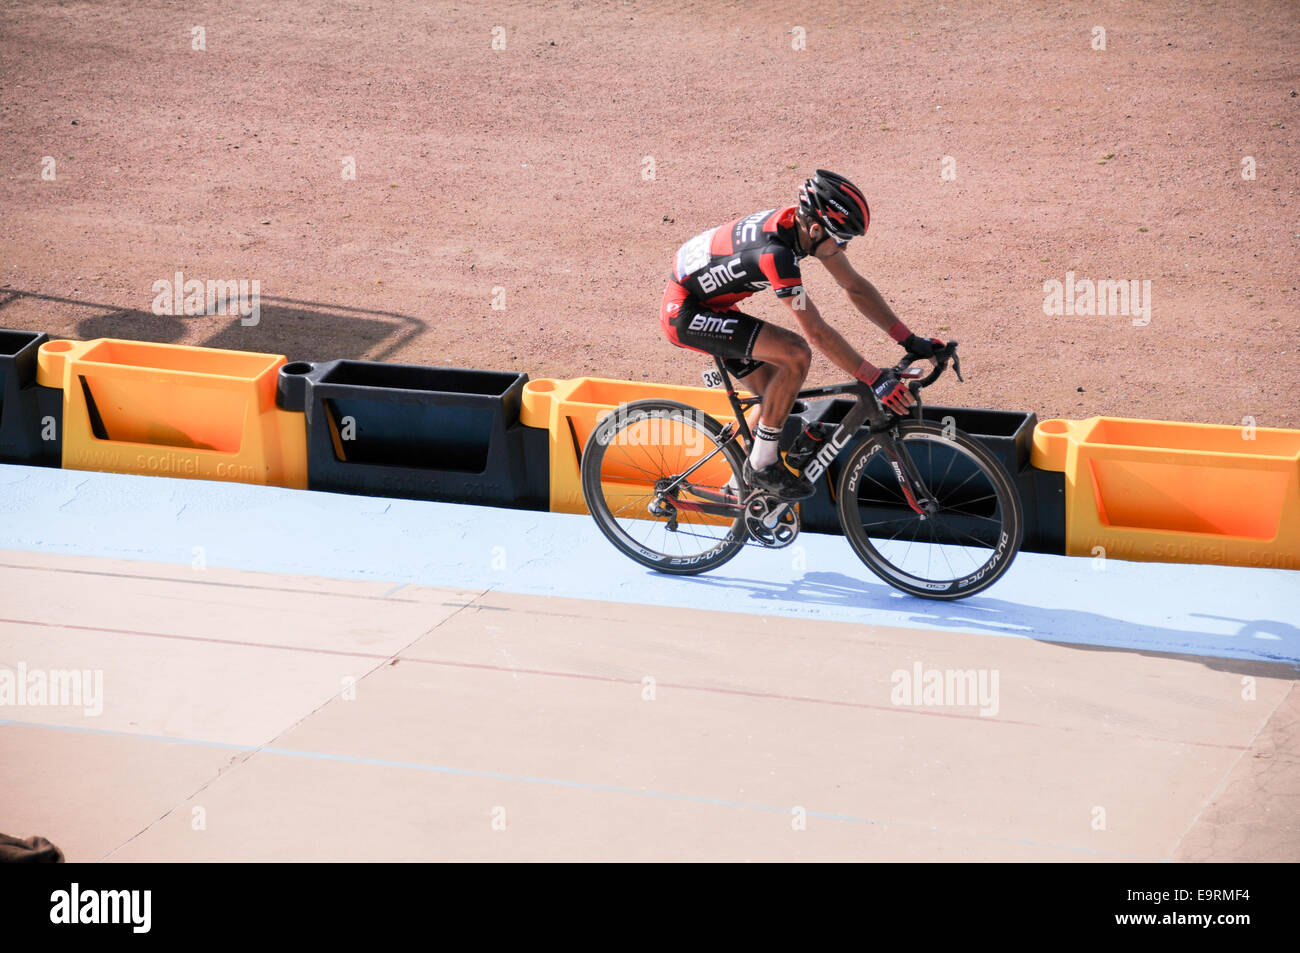 Swiss BMC rider Danilo Wyss rolls in to a 76th. place at the 2014 Paris Roubaix. Stock Photo